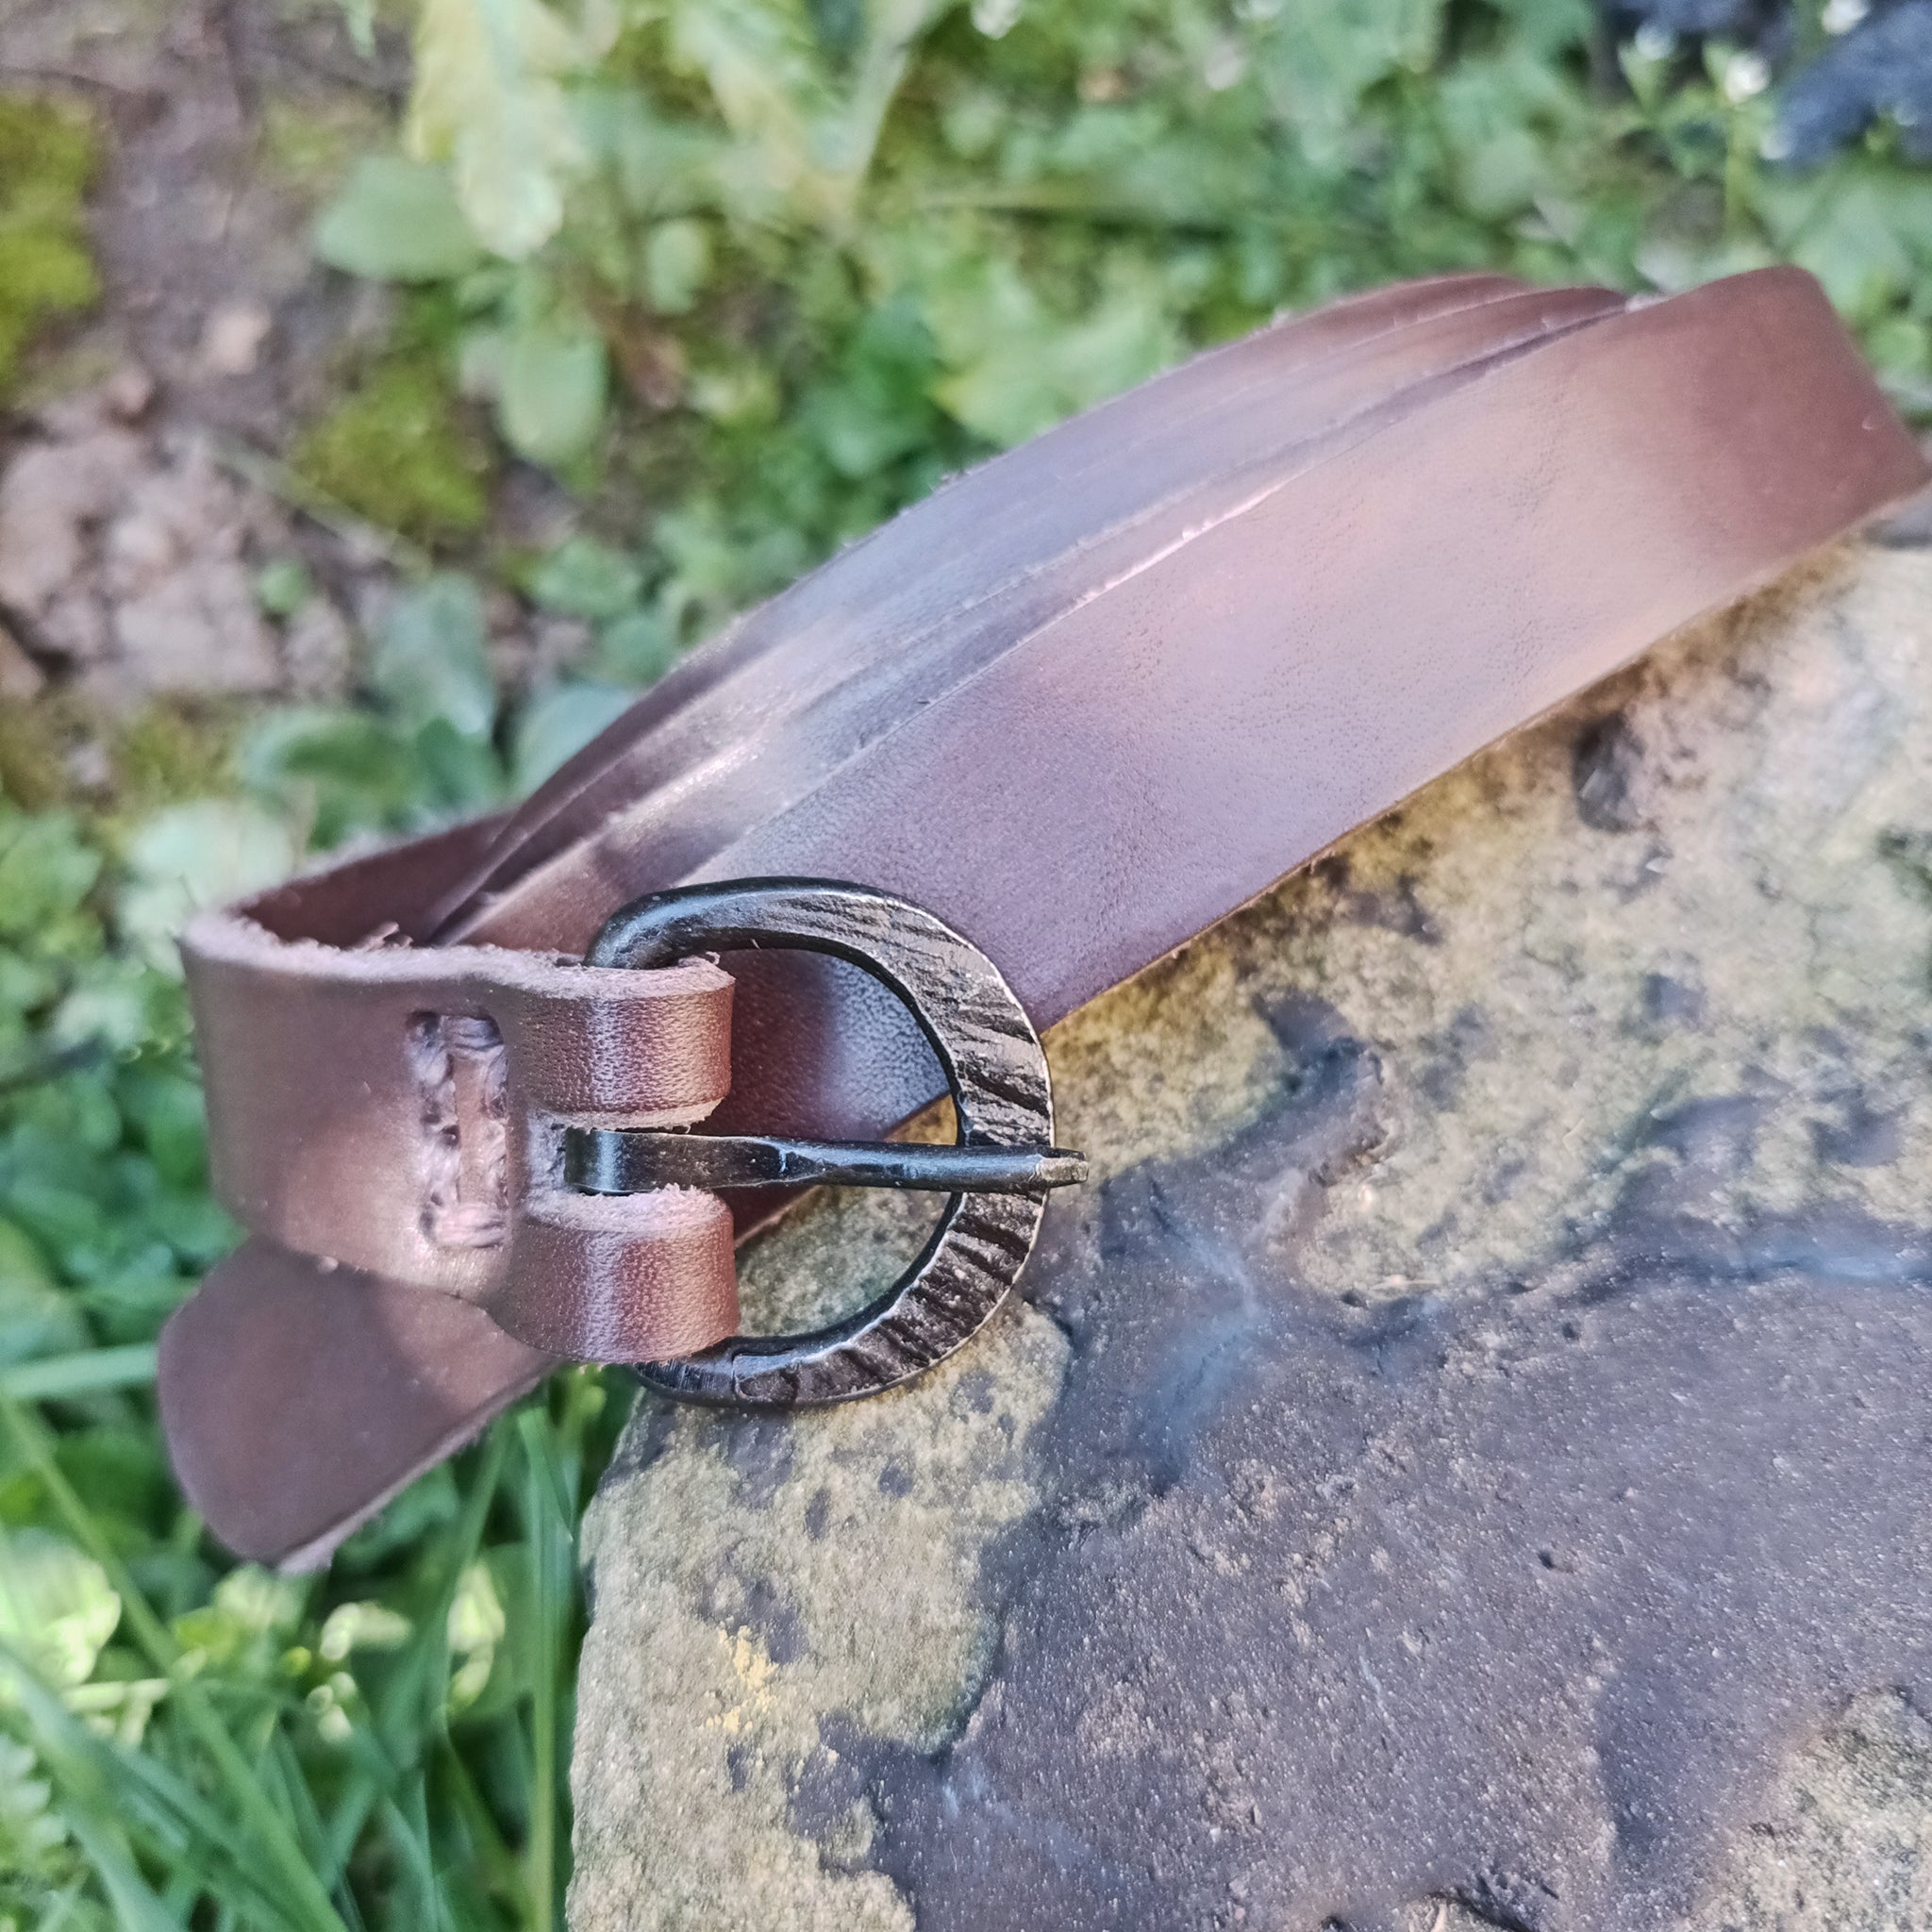 Long Viking / Medieval Belt with Hand-Forged Iron Buckle - 20mm (0.75 inch) Width on Rock - Angled View